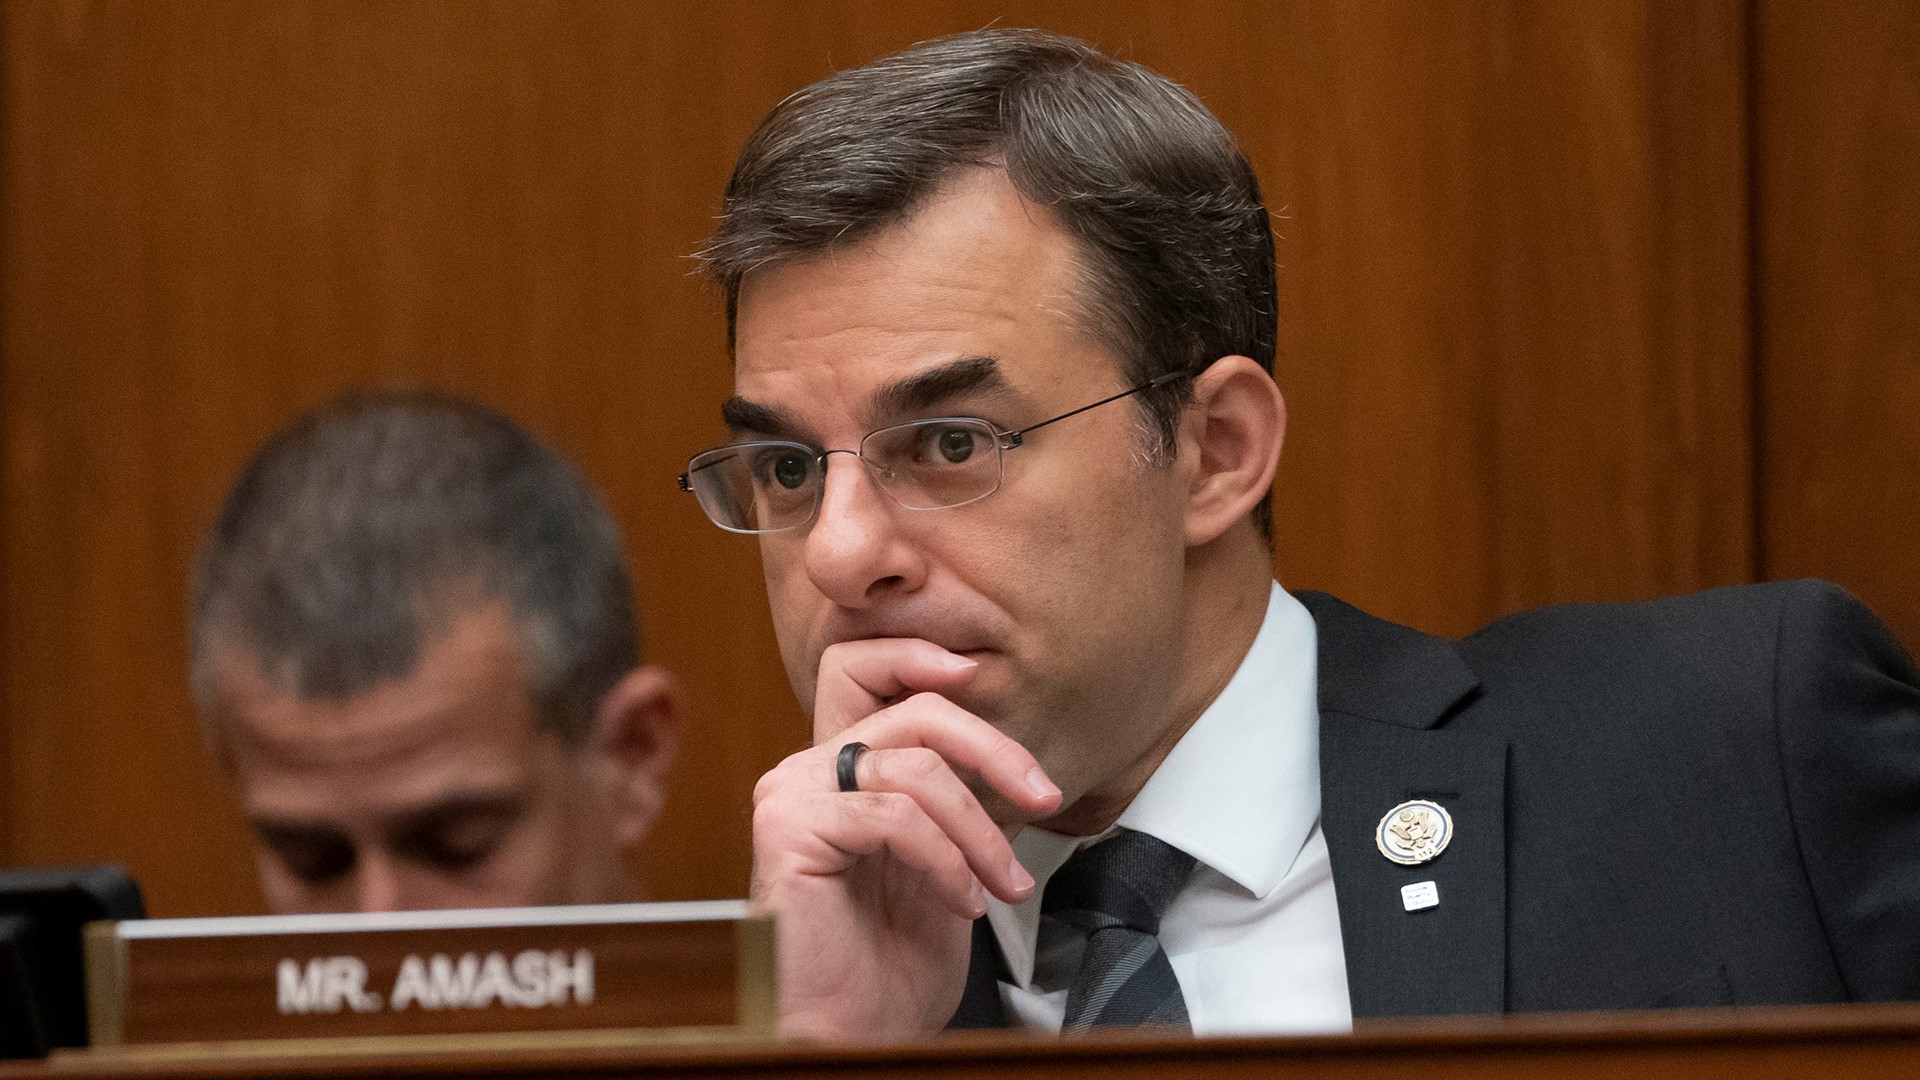 Without the backing of a major party, U.S. Rep. Justin Amash's campaign outraised his competitors in 2019.